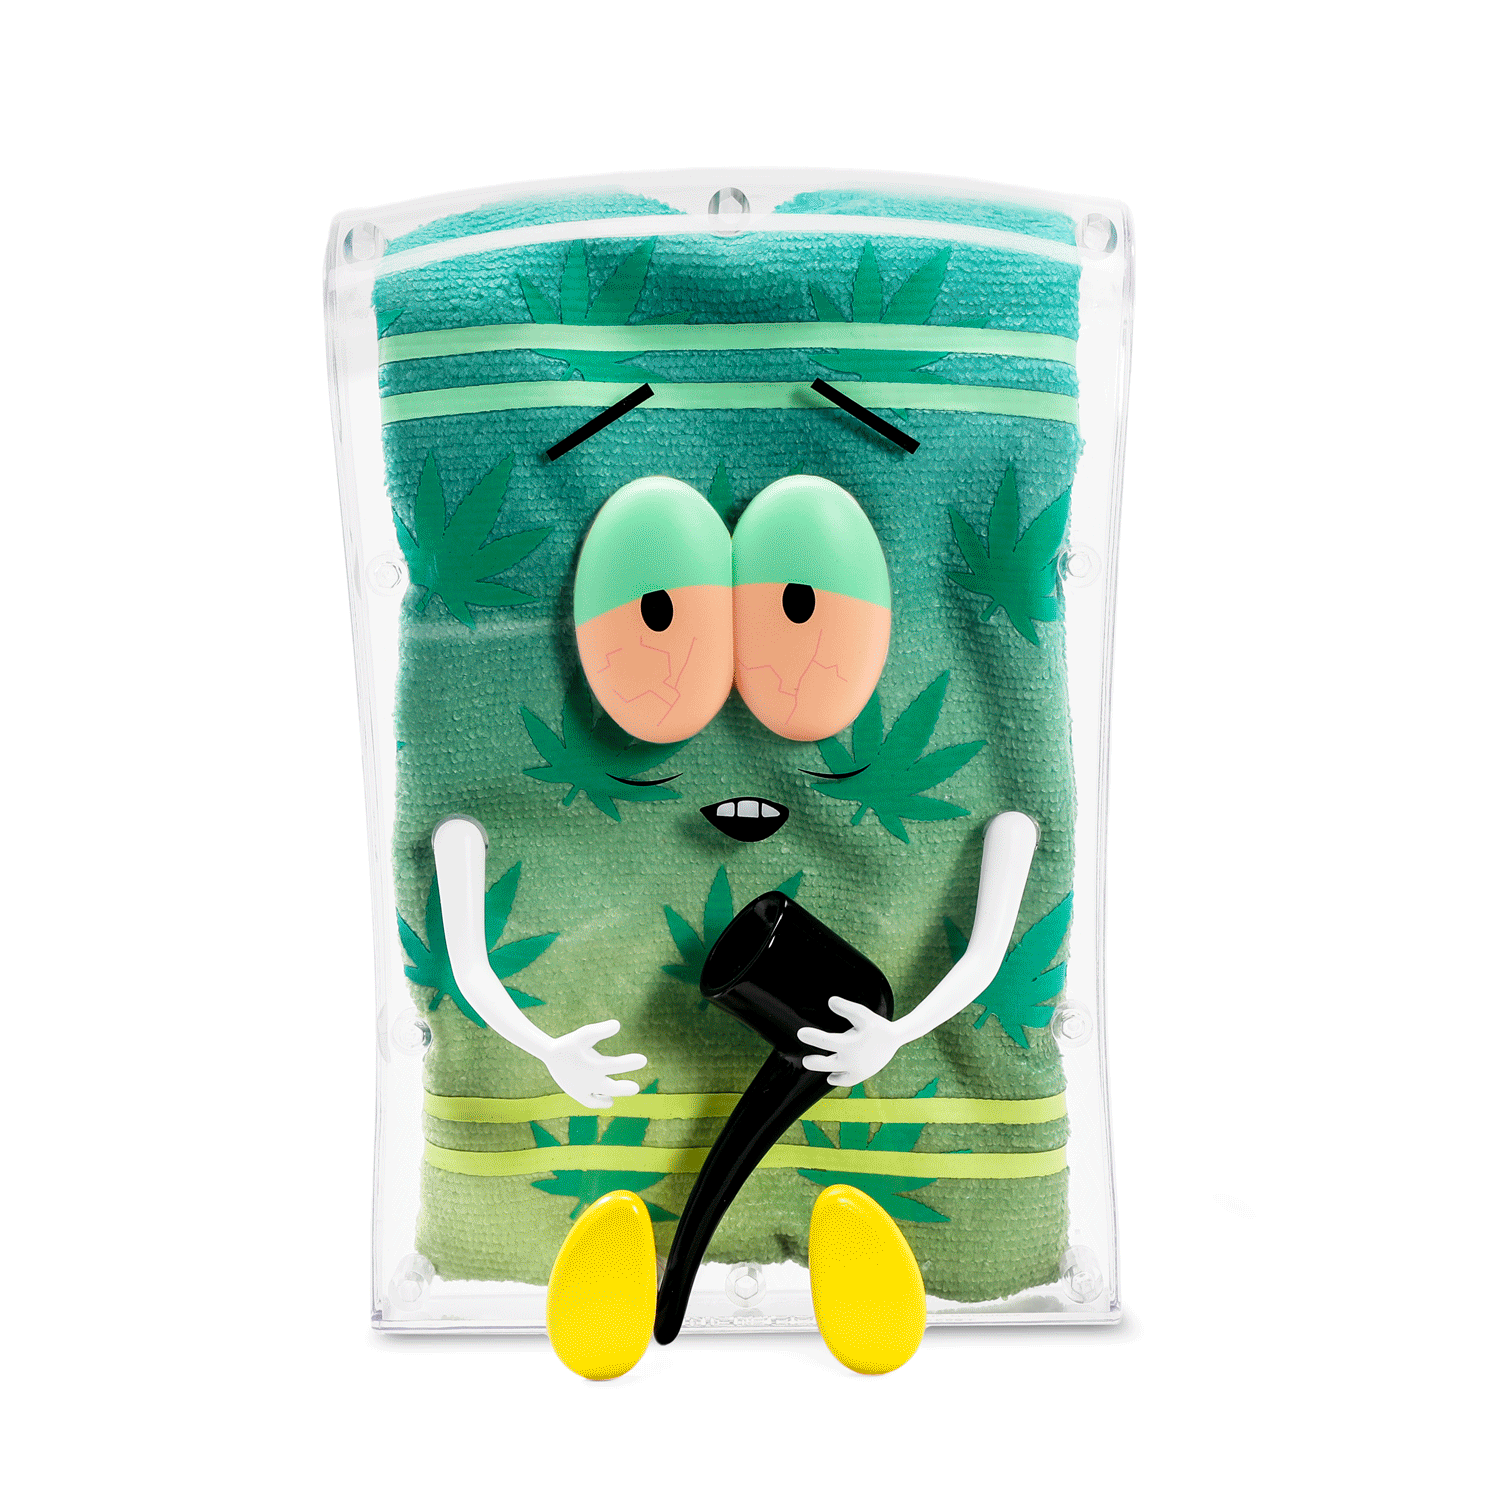 South Park Stoned Towelie with Pipe Glow-in-the-Dark Pot Leaf 8” Art Figure - 420 Edition - Kidrobot.com Exclusive